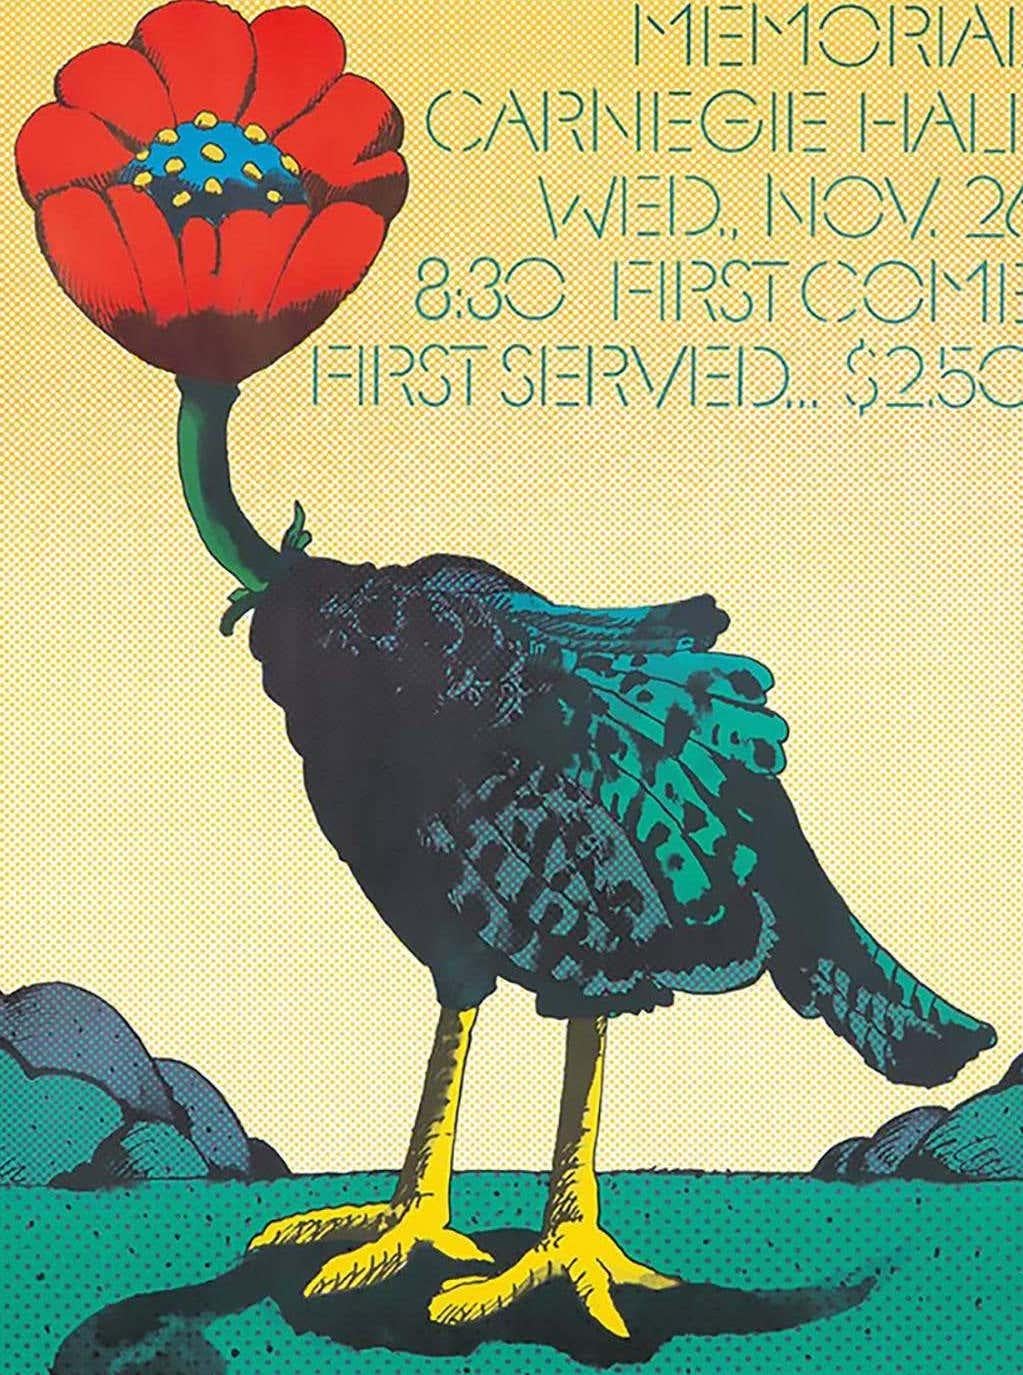 1960s Milton Glaser Poster Art: 
Milton Glaser Poppy Gives Thanks: Vintage original Milton Glaser poster c.1968. Designed by Milton Glaser on the occasion of a concert at New York's Carnegie Hall featuring poppy recording artists (Townes Van Zandt,